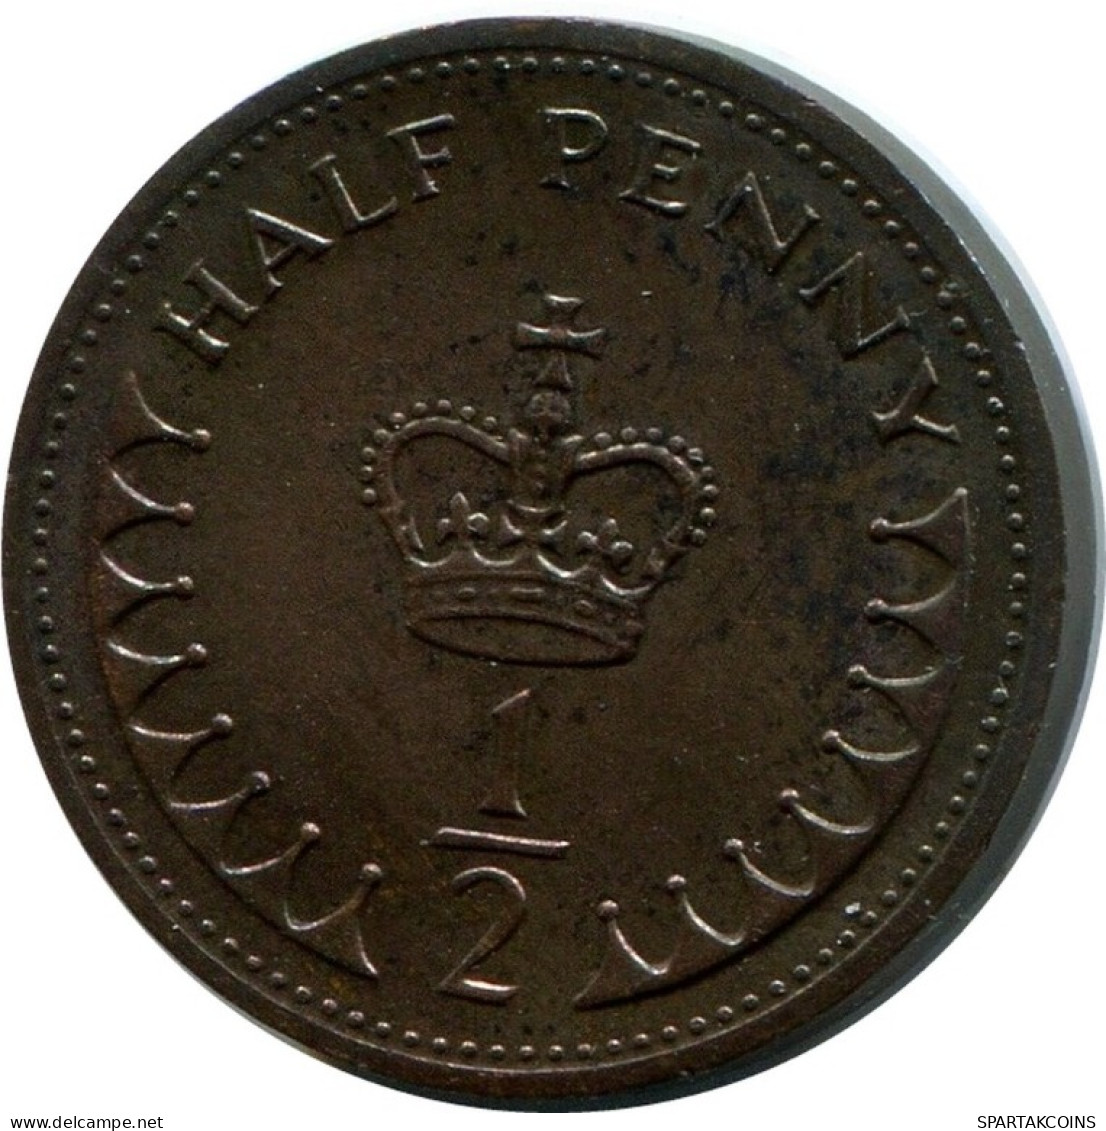 NEW PENNY 1982 UK GRANDE-BRETAGNE GREAT BRITAIN Pièce #AN525.F.A - 1 Penny & 1 New Penny